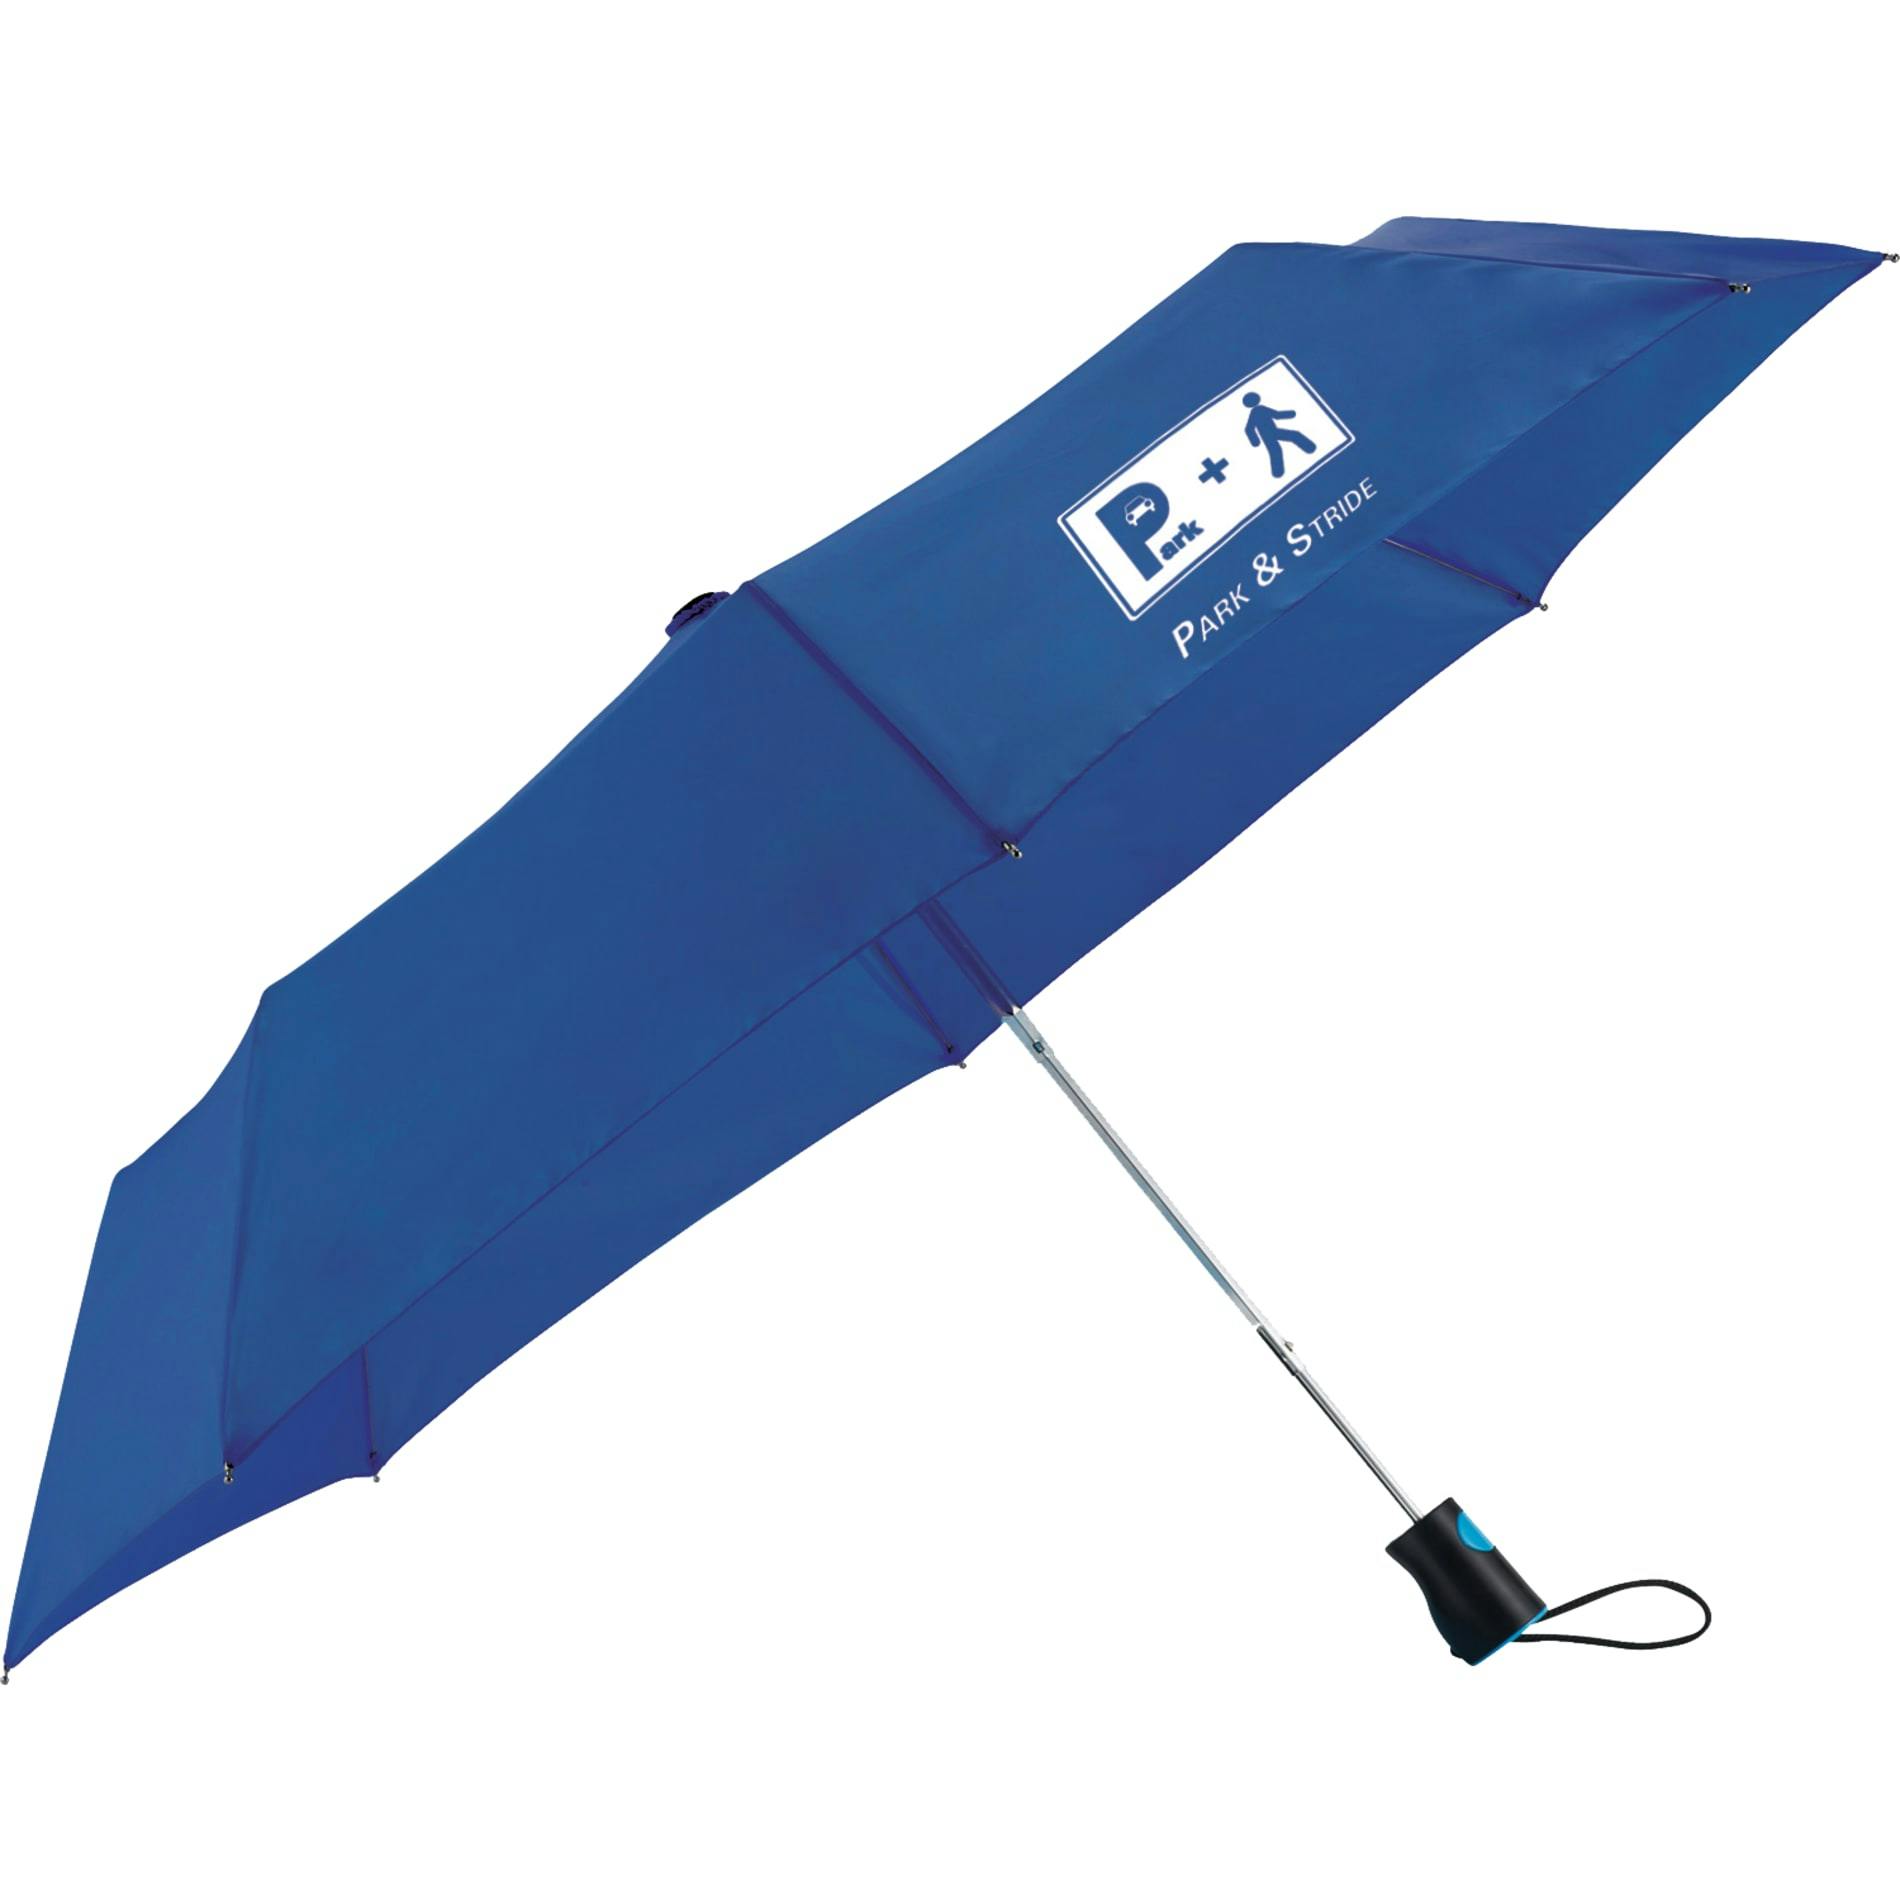 42" totes® 3 Section Auto Open Umbrella - additional Image 3